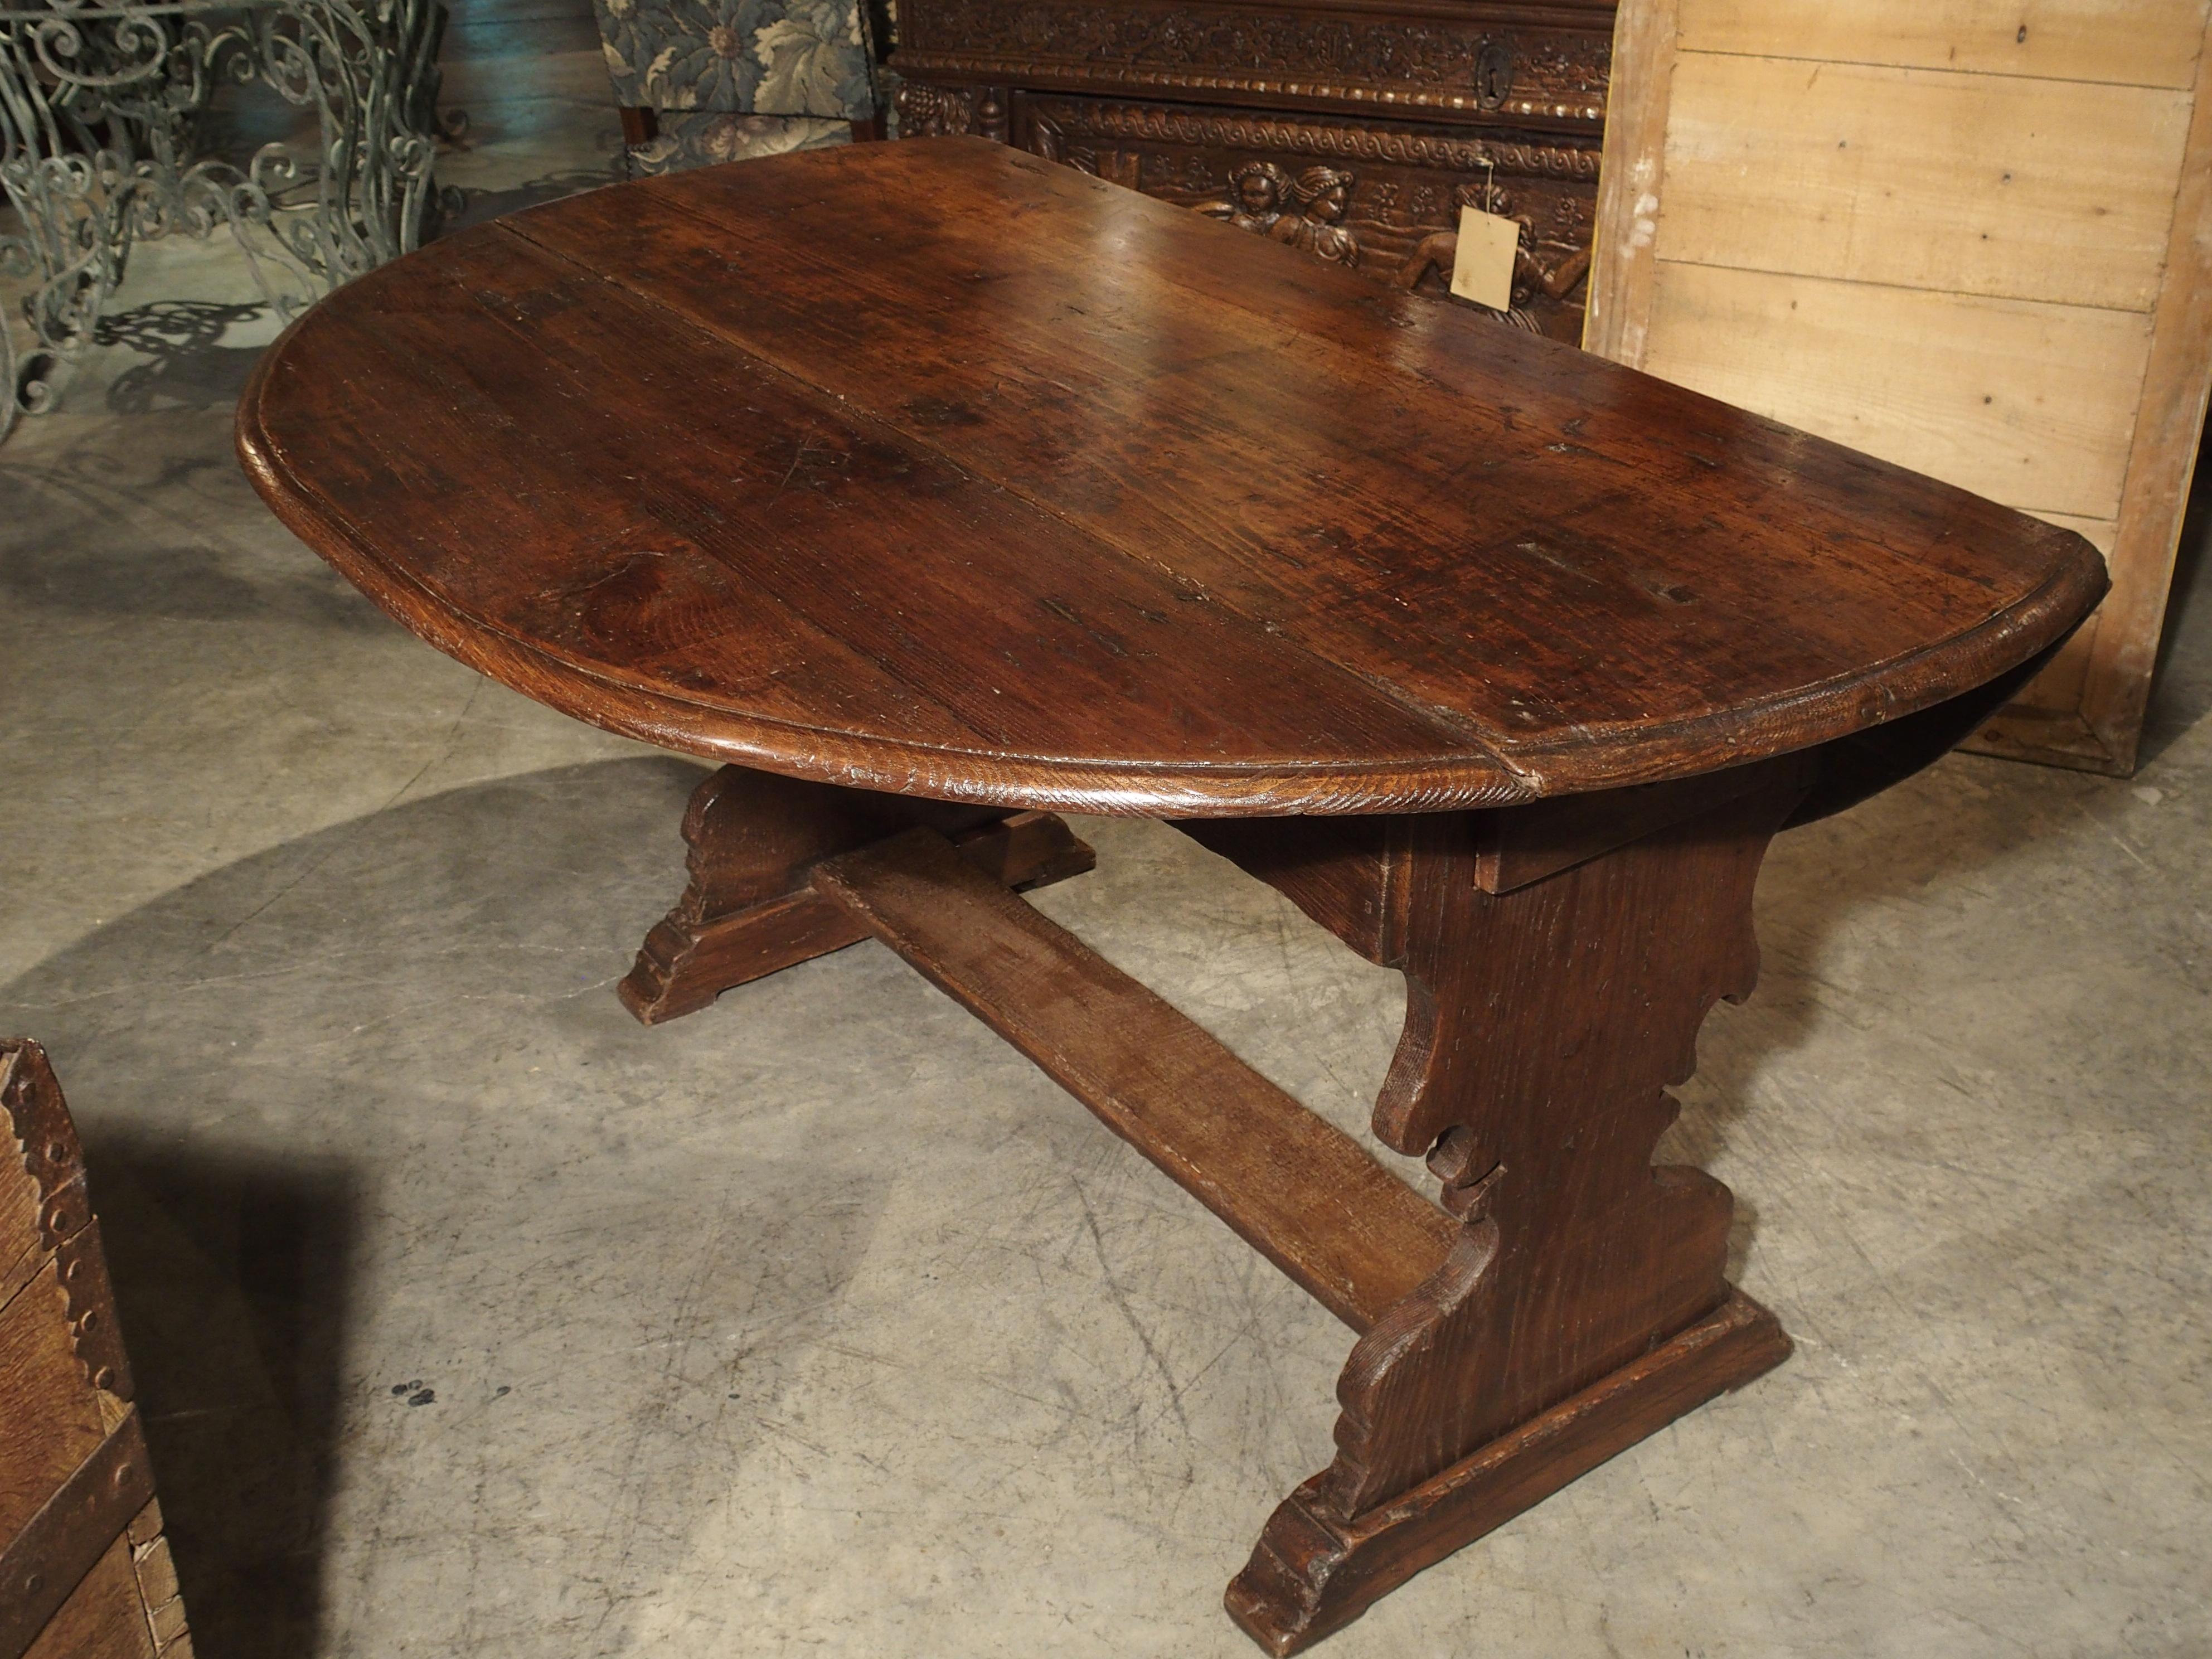 Hand-Carved Antique Chestnut Wood Drop Leaf Table from Italy, circa 1790